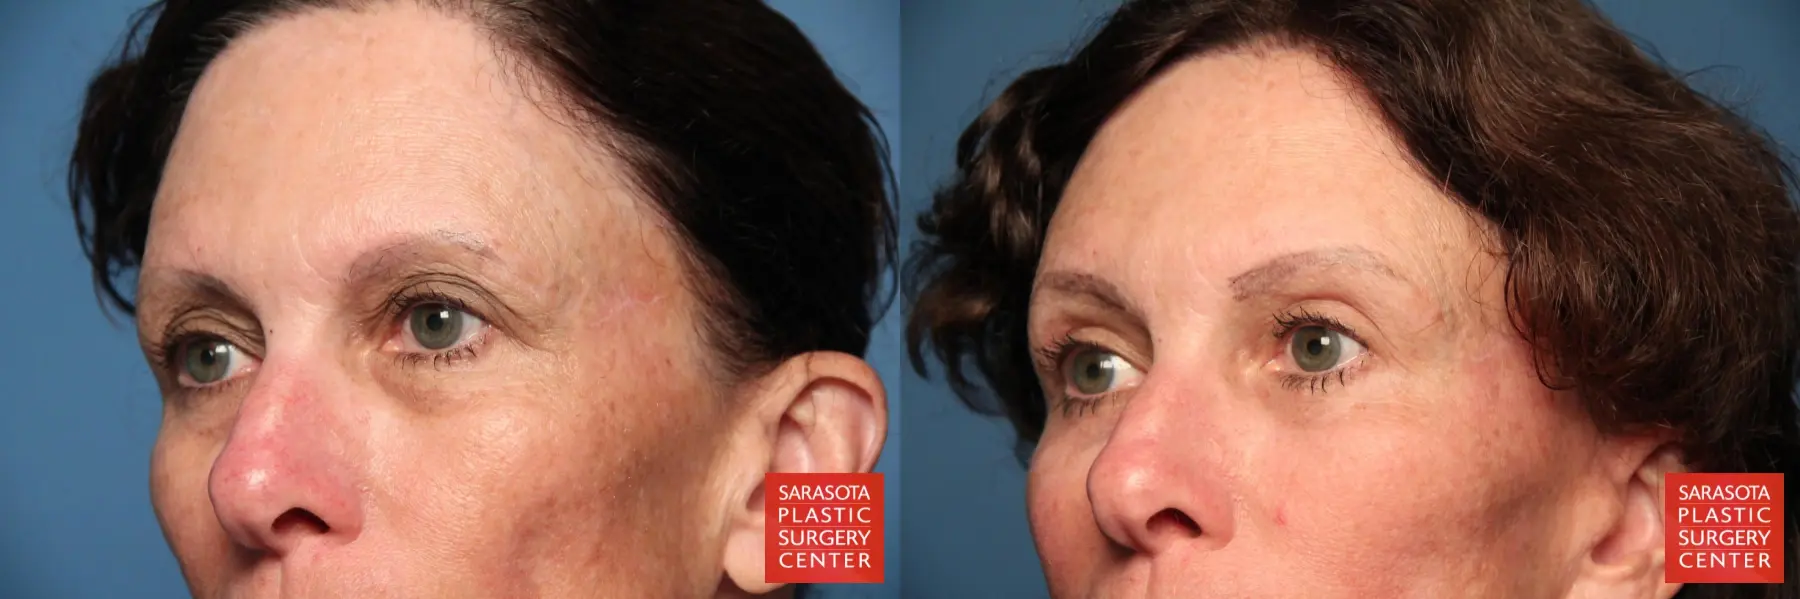 Eyelid Lift: Patient 8 - Before and After 3